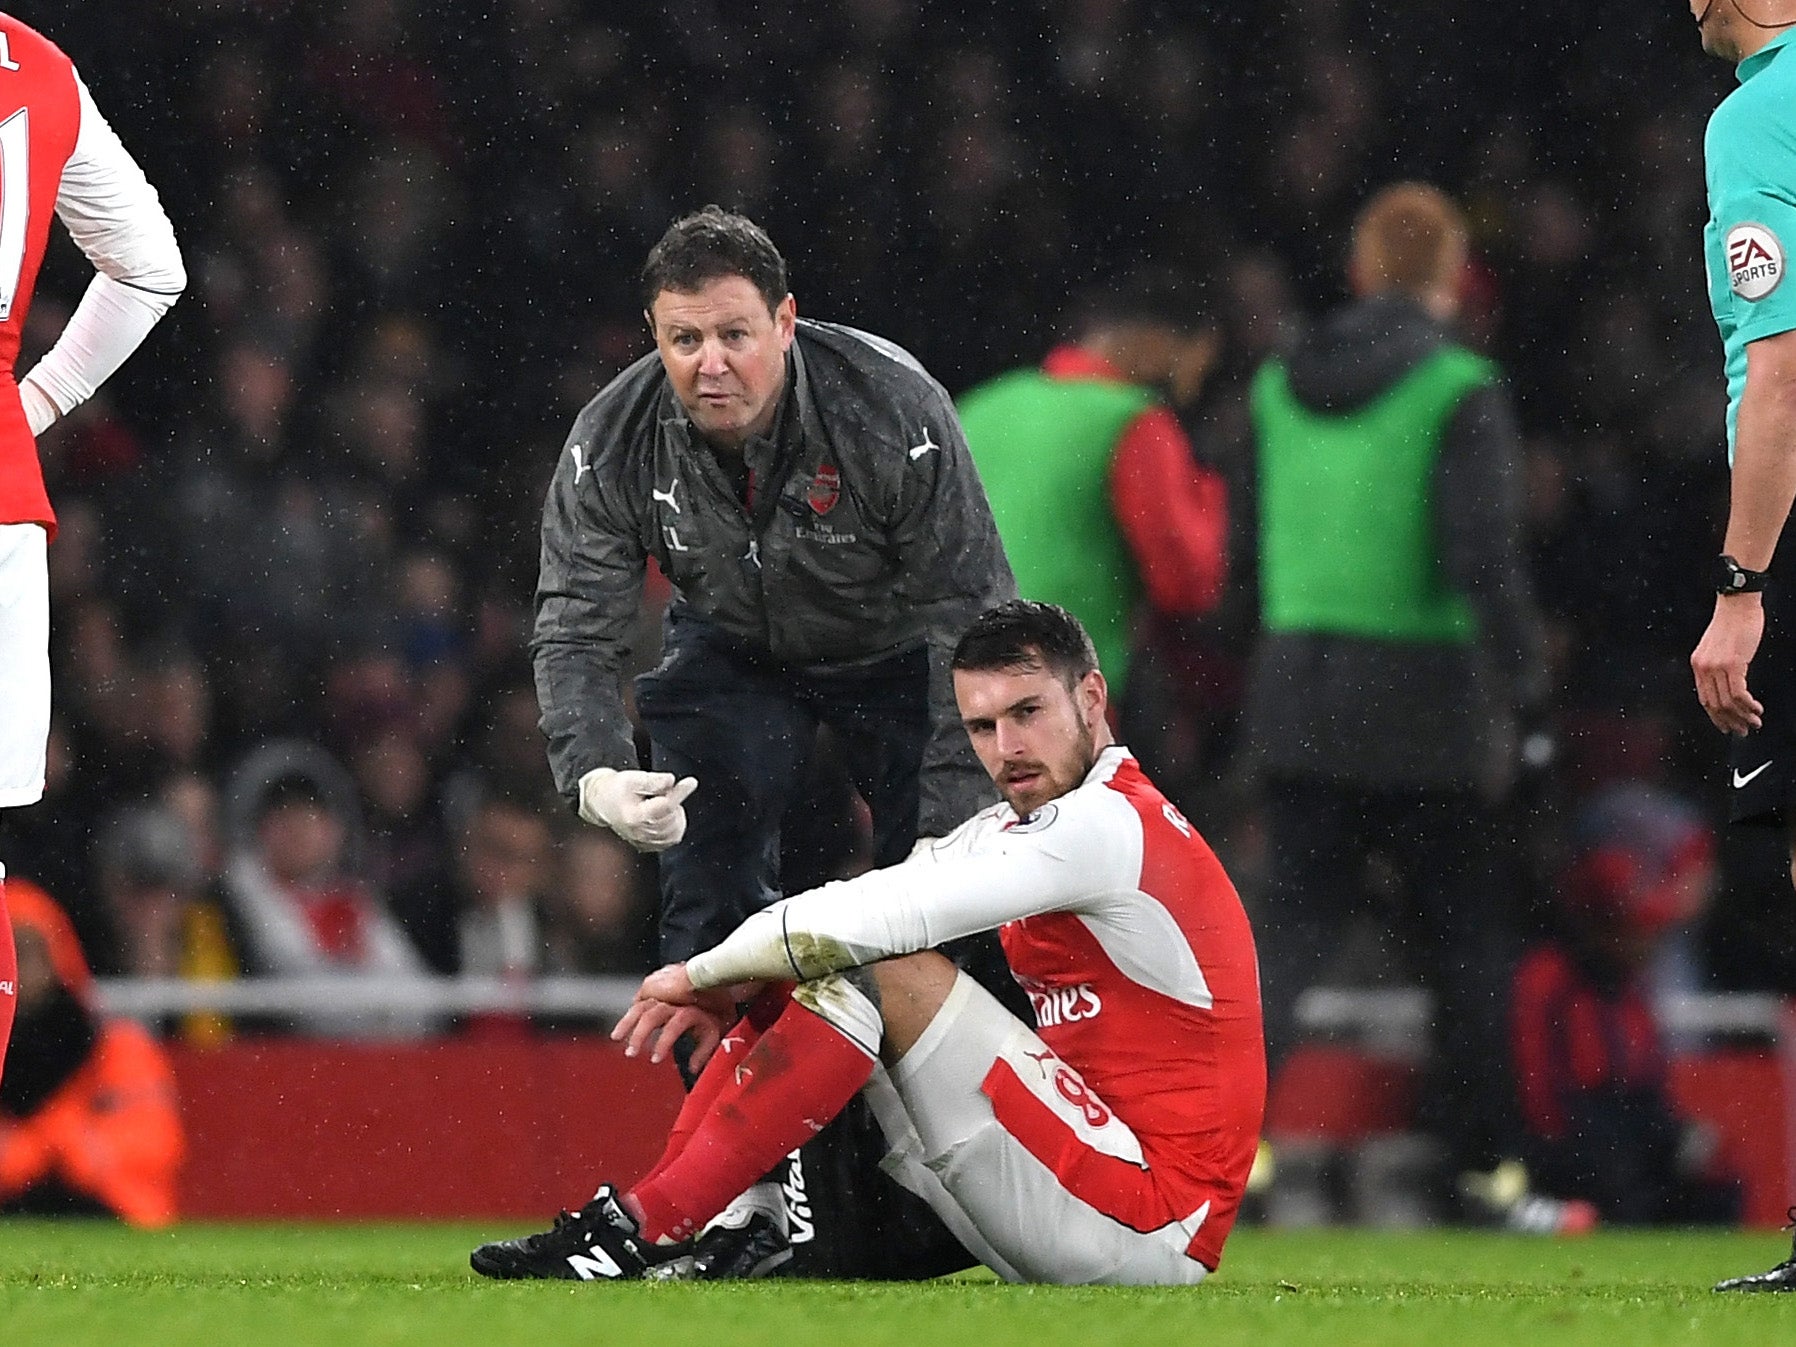 It is Ramsey's second notable injury of the season